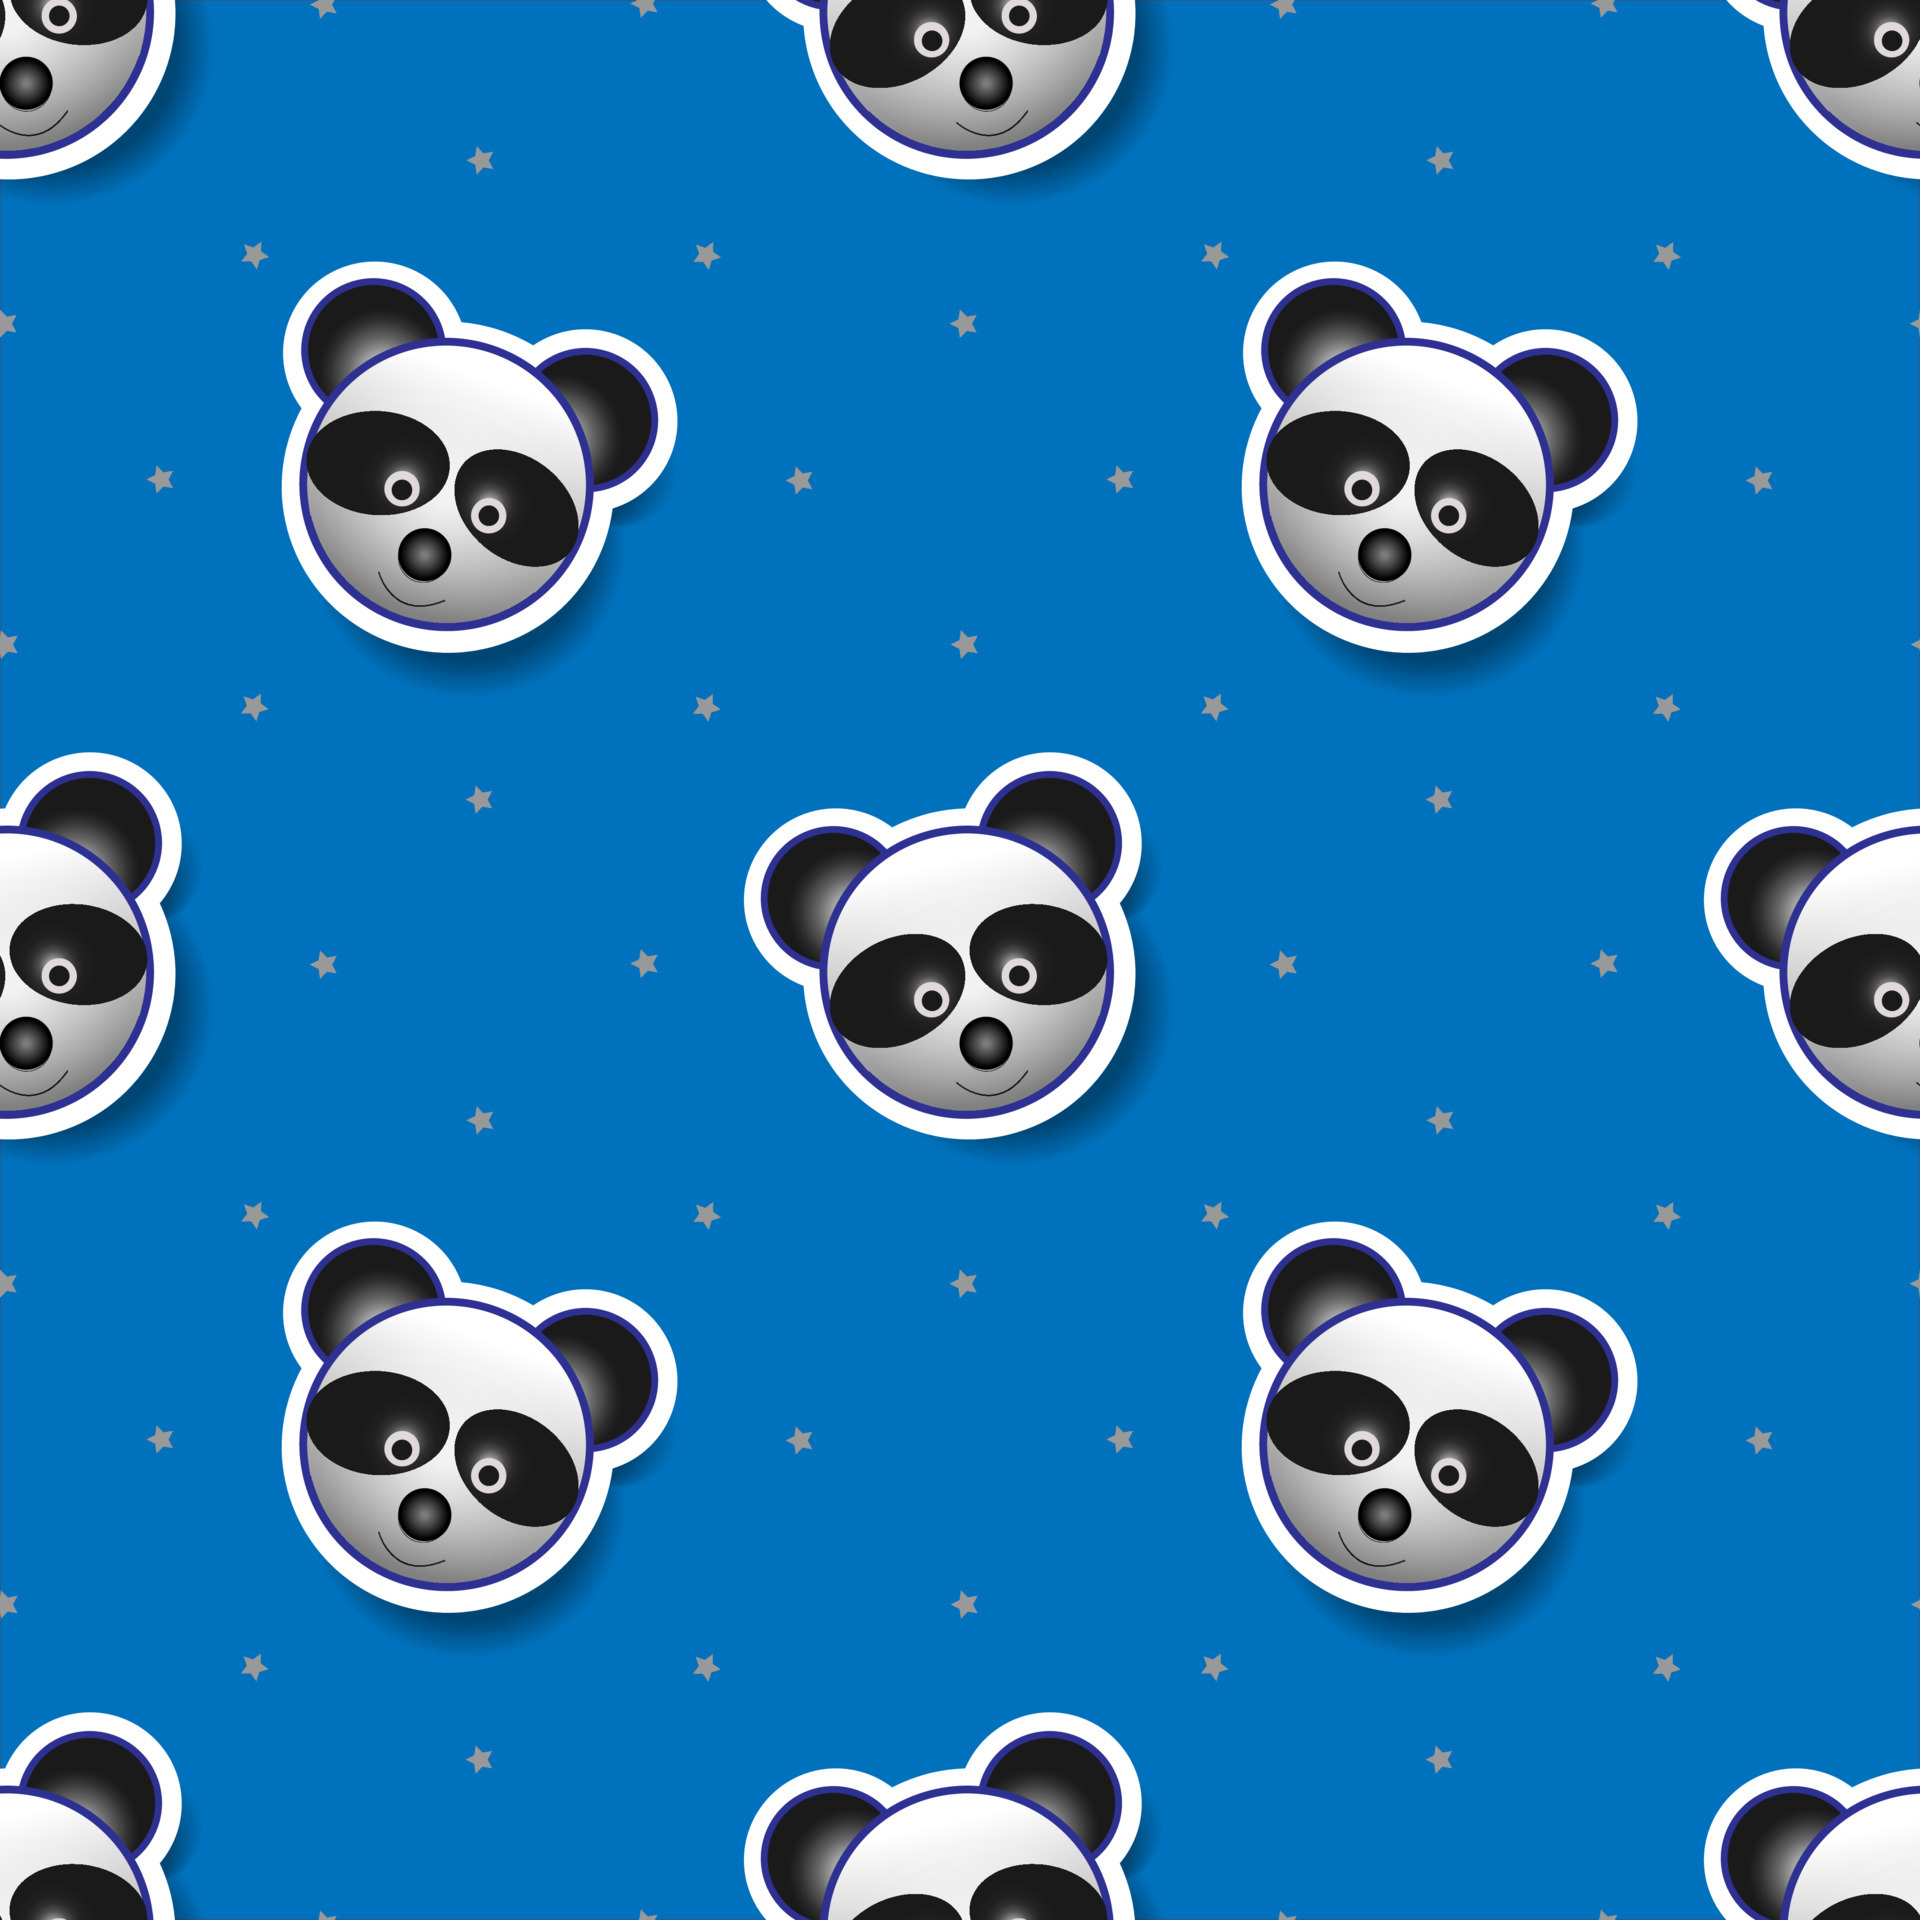 1920x1920 vector illustration of panda bear animal face design. blue background. Seamless pattern designs for wallpapers, backdrops, covers, paper cut, stickers and prints on fabric. 4411895 Vector Art